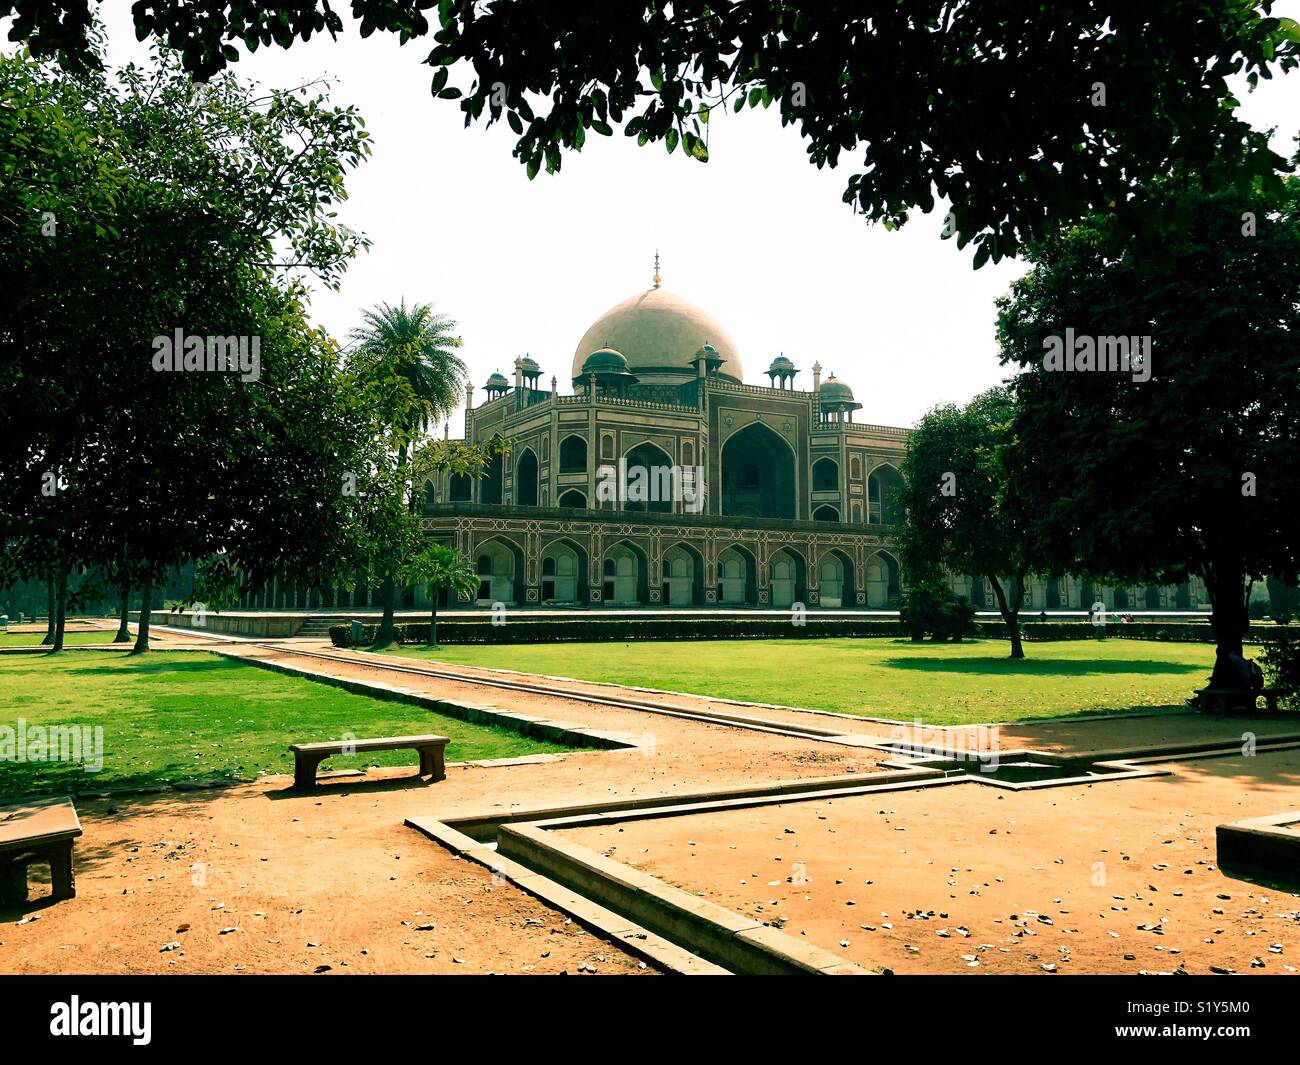 HUMAYUN'S TOMB-Humayun's tomb is the tomb of the Mughal Emperor Humayun in Delhi, India. The tomb was commissioned by Humayun's first wife and chief consort, Empress Bega Begum, in 1569-70, Stock Photo